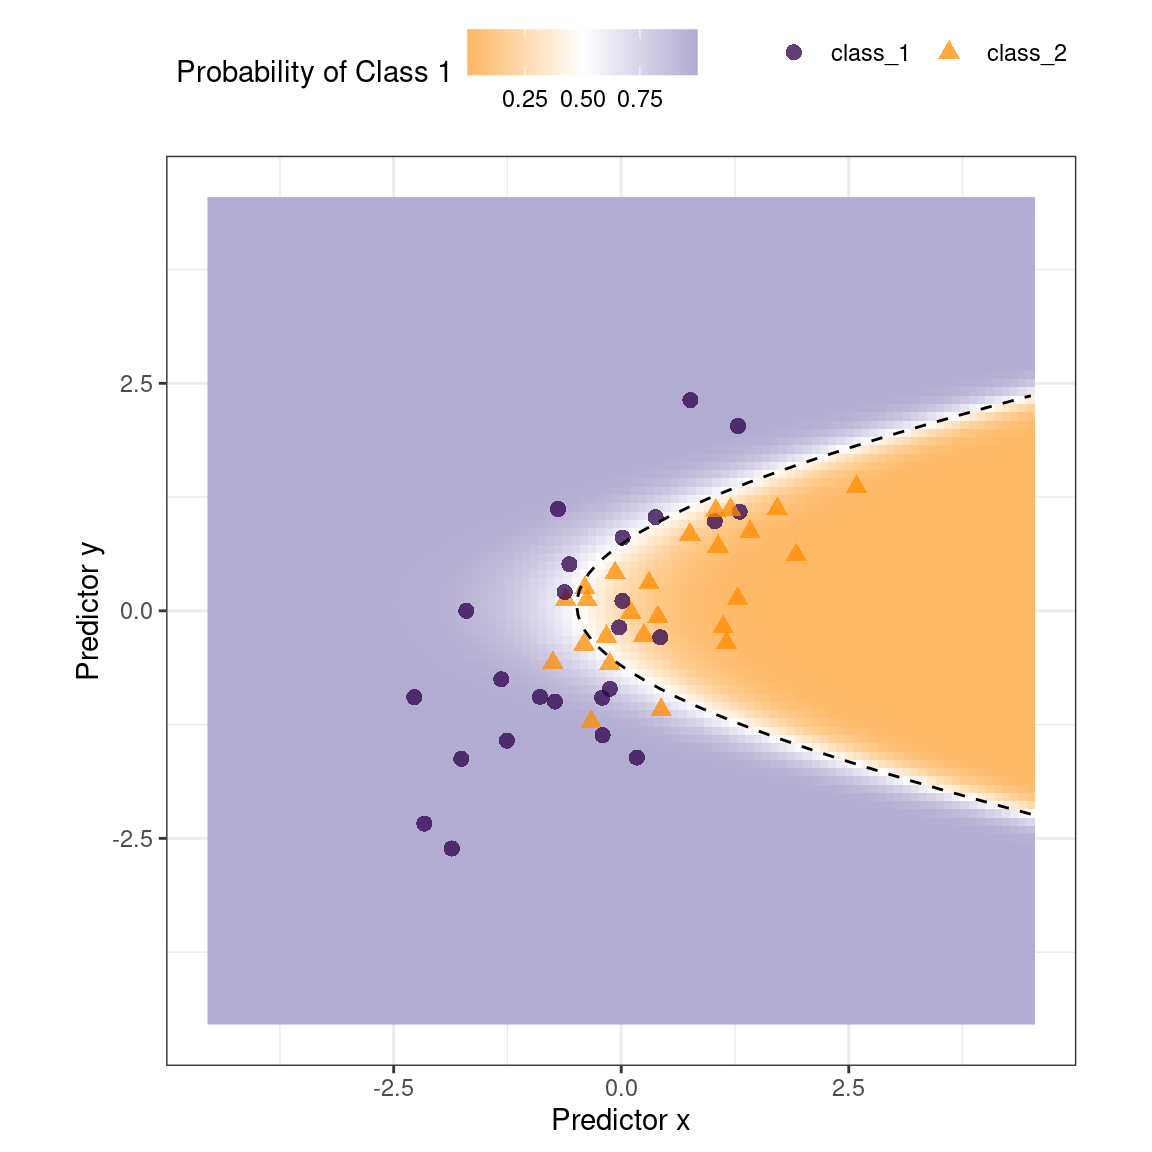 Simulated two-class data set with a logistic regression fit and decision boundary. The scatter plot of the two classes shows fairly correlated data. The decision boundary is a parabola in the x axis that does a good job of separating the classes.